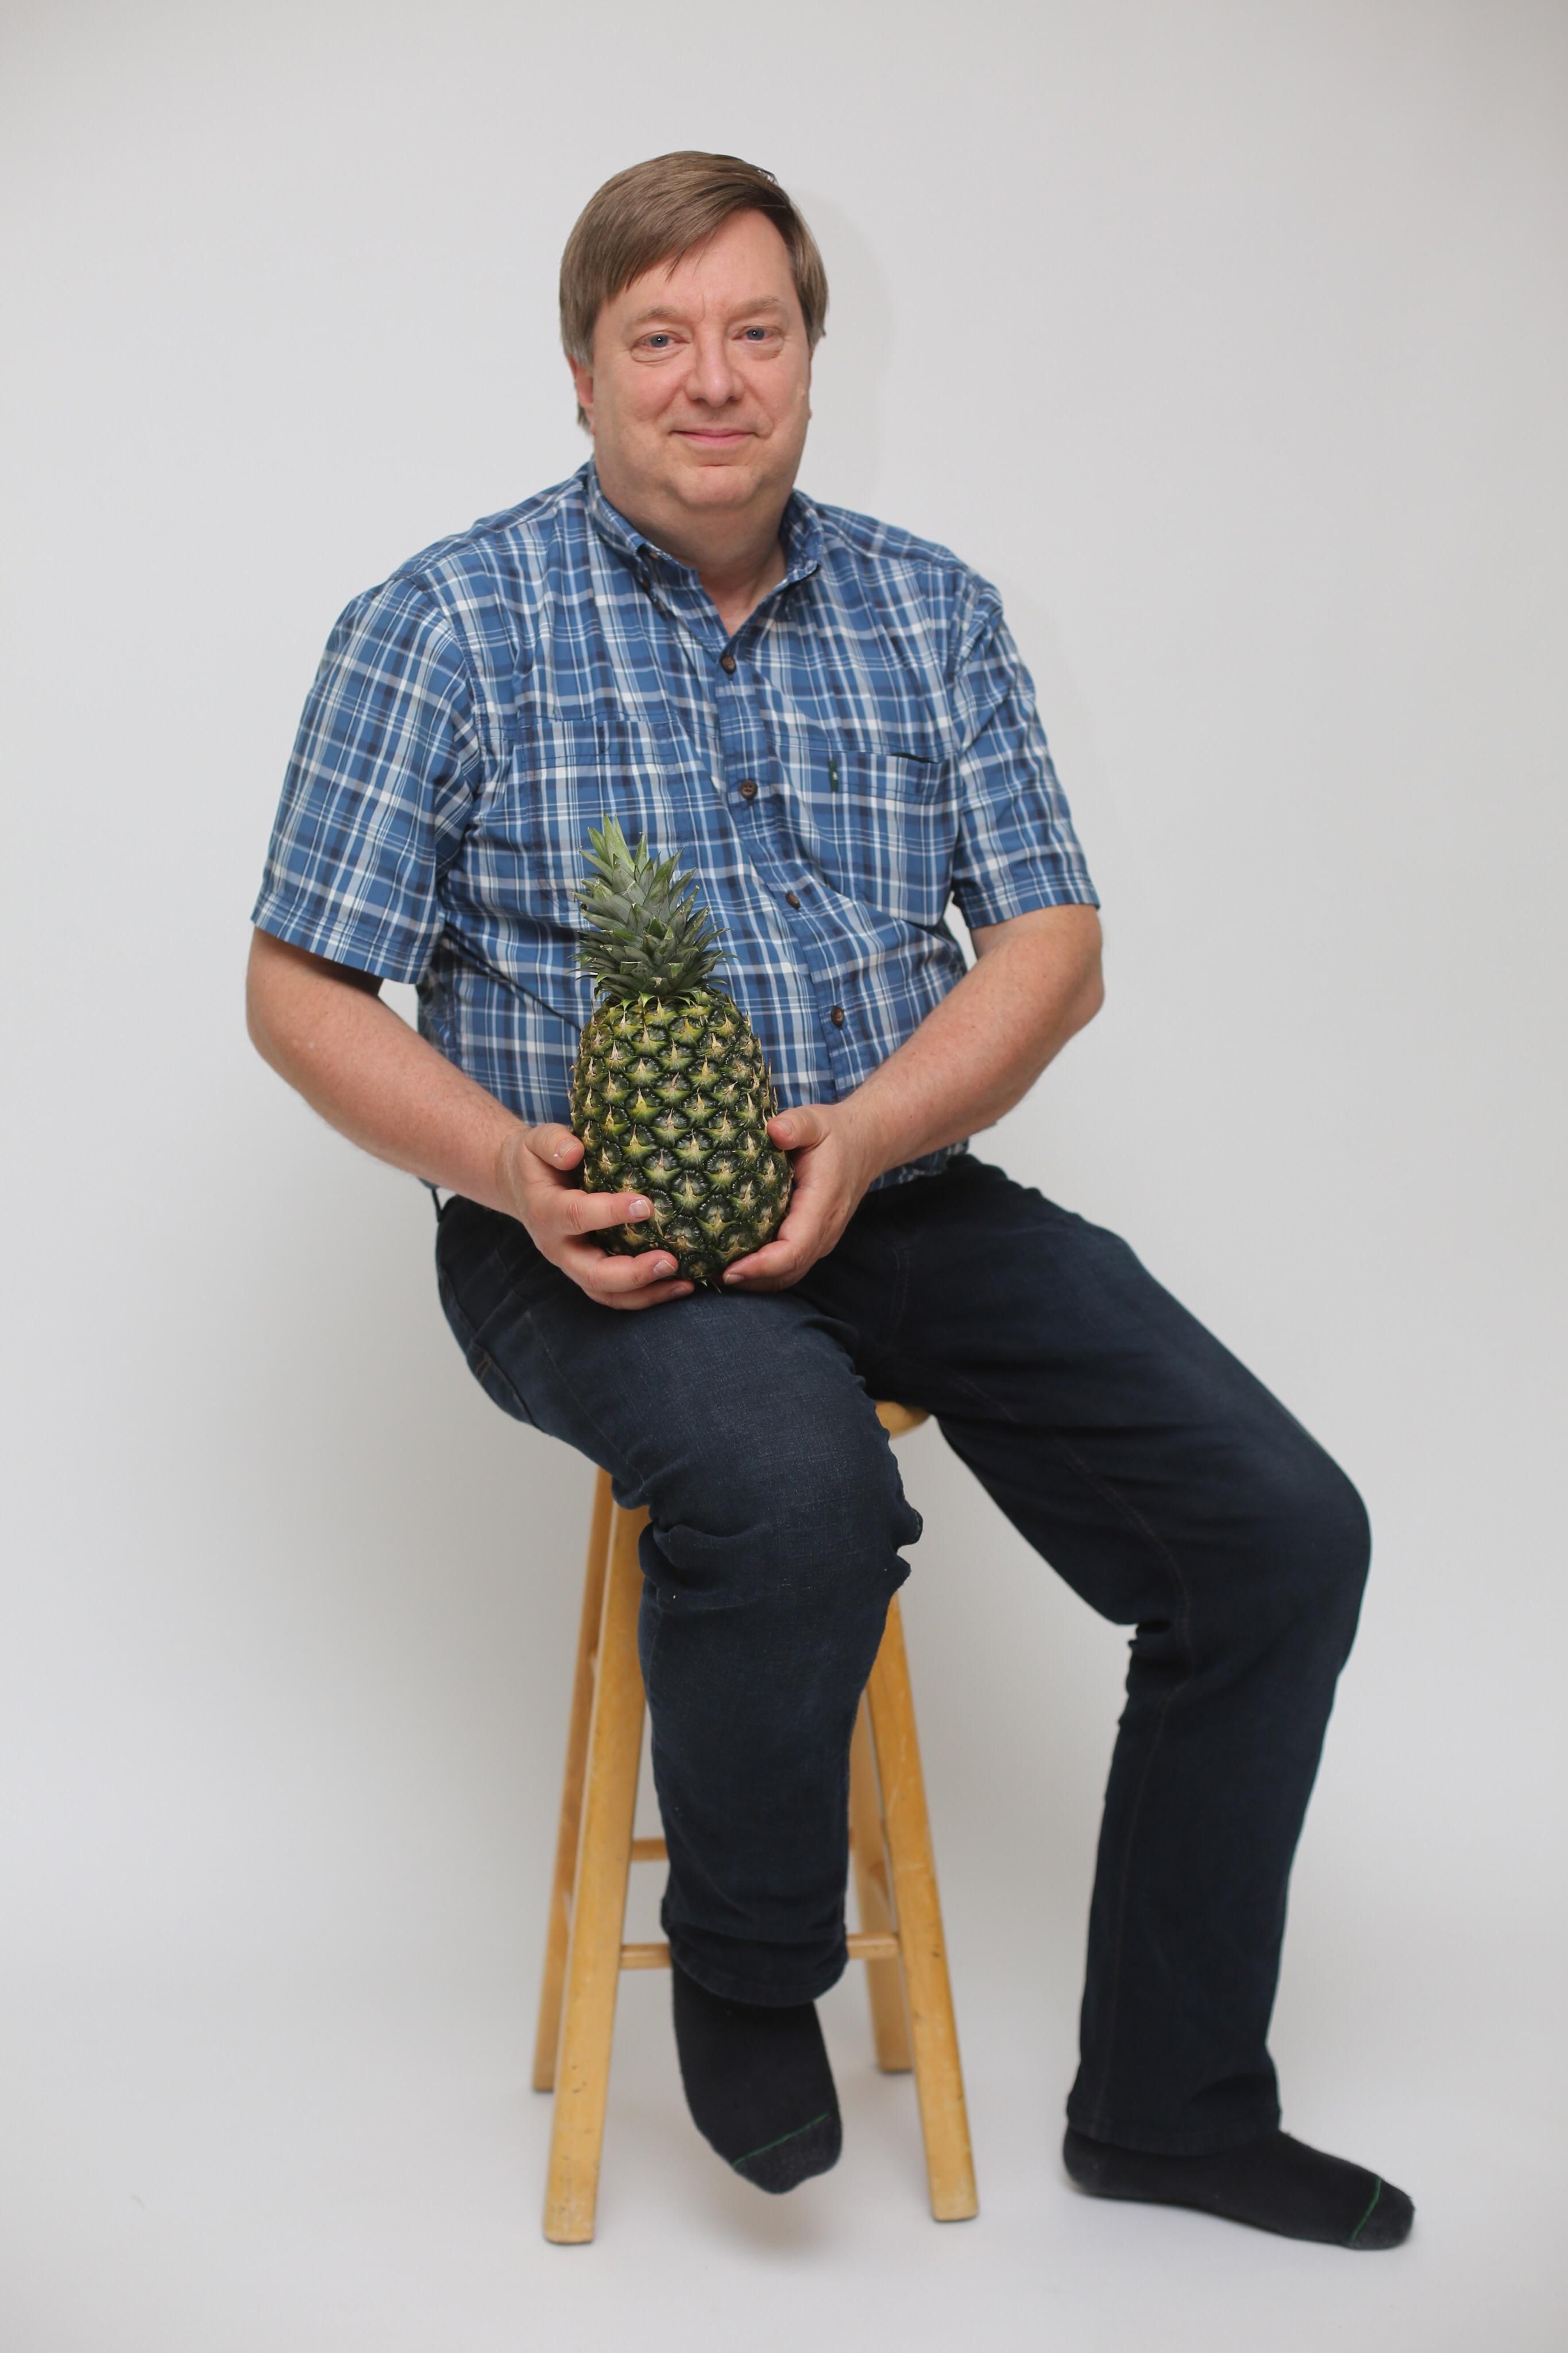 My dad has been trying to grow pineapples for the last year, today he succeeded, look how proud he is.